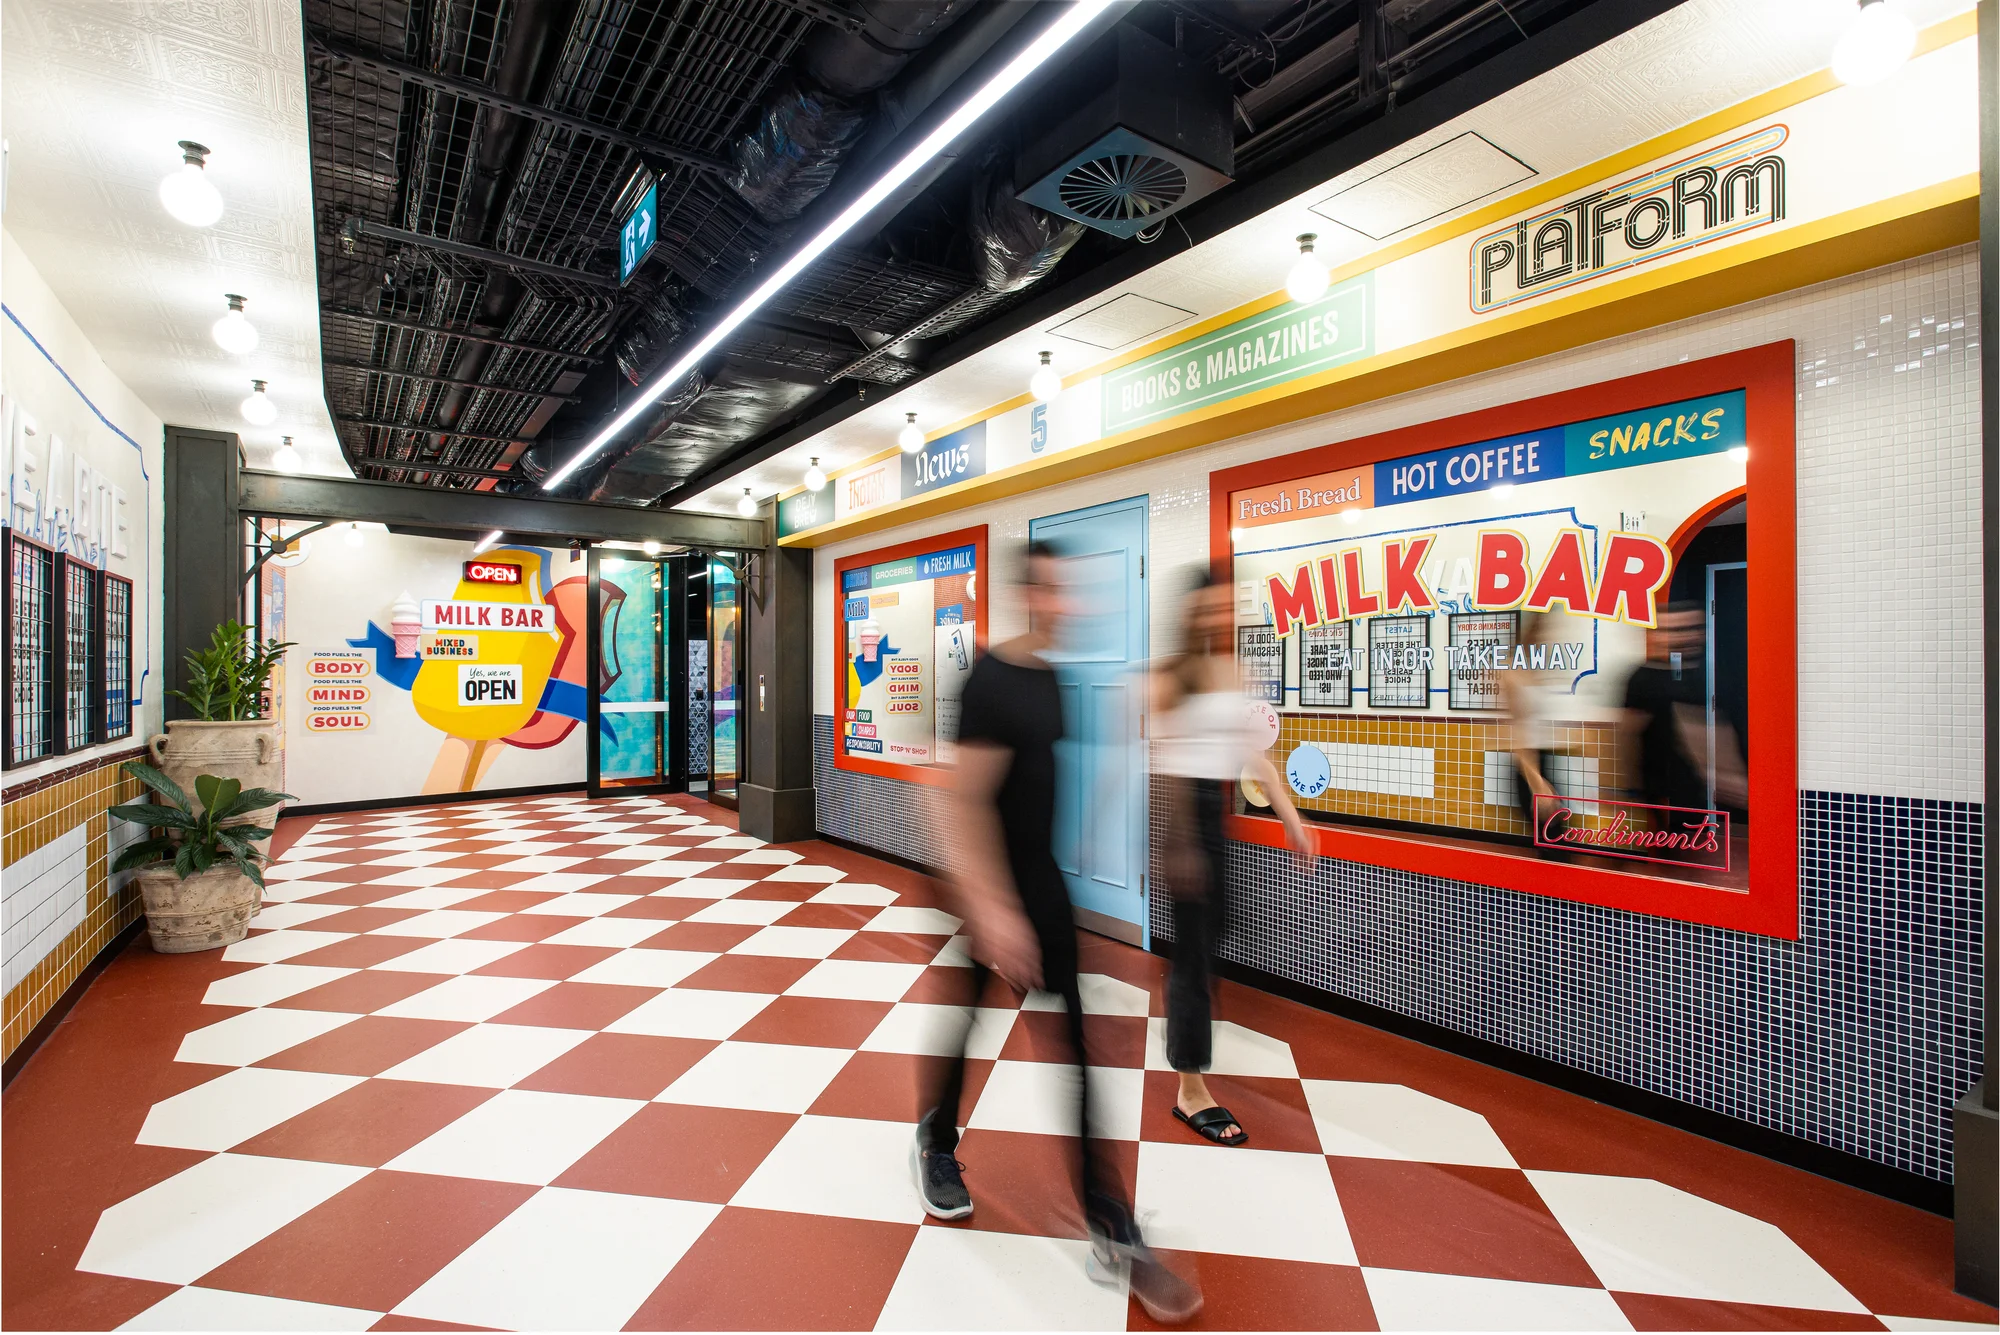 colorful image of a retro milk bar-like entrance to Google's cafe